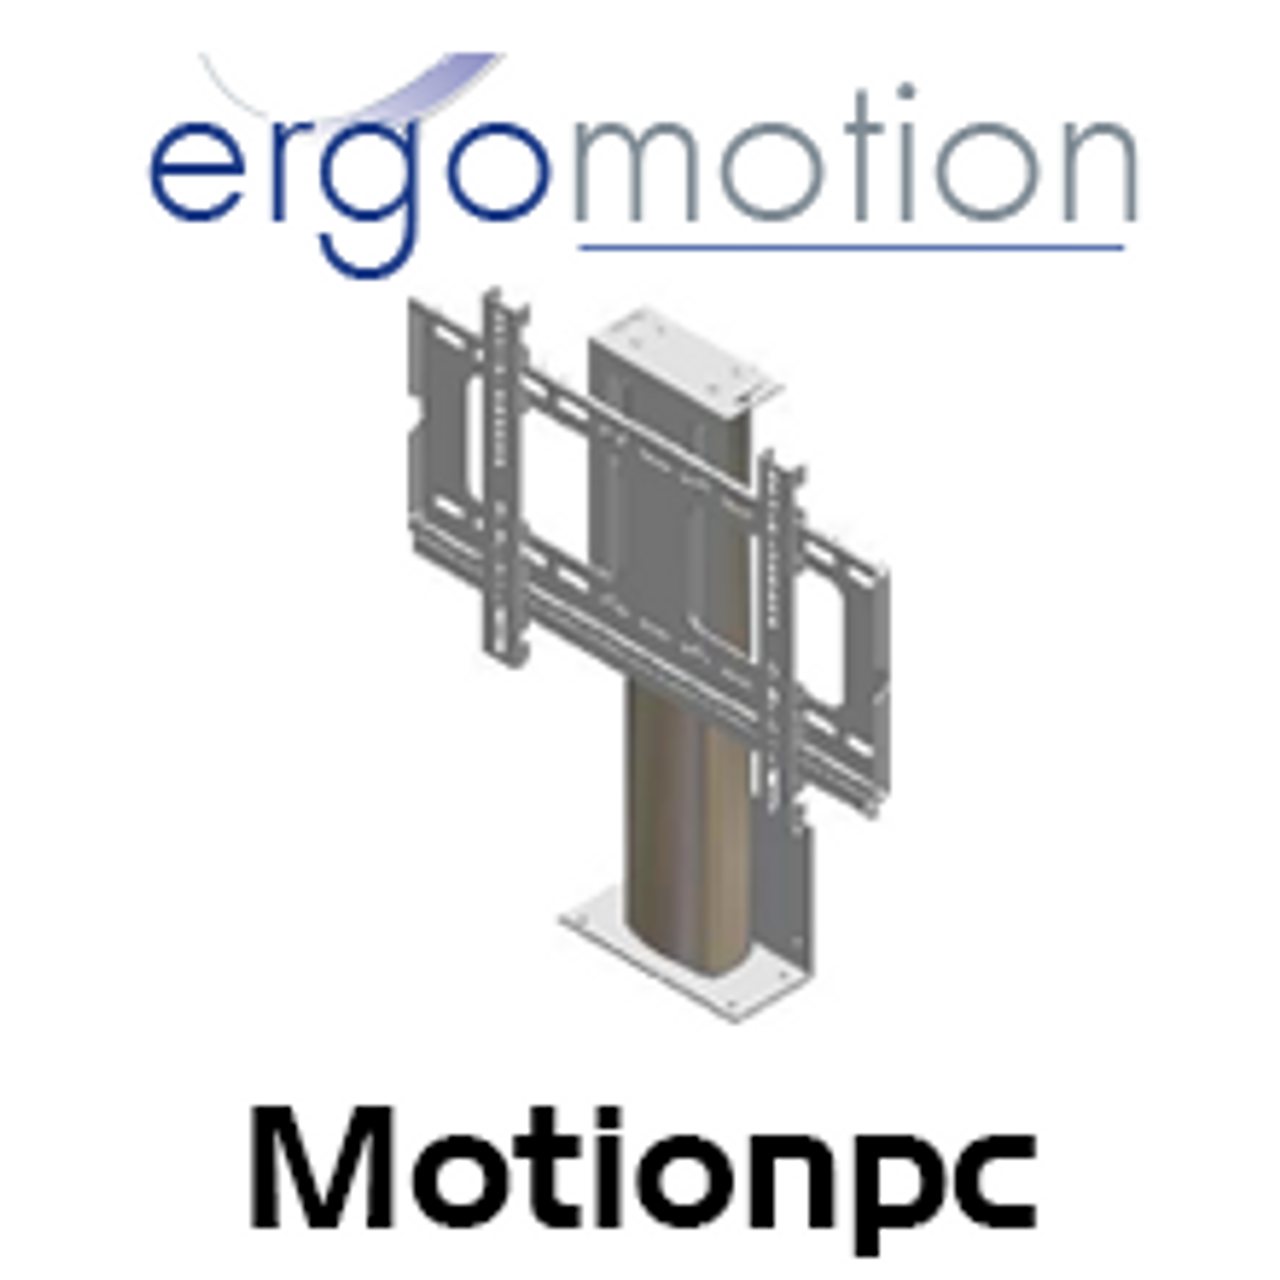 Ergomotion Motionpc Small Electric Monitor Lift for 27" - 32" LCD TV / Monitor